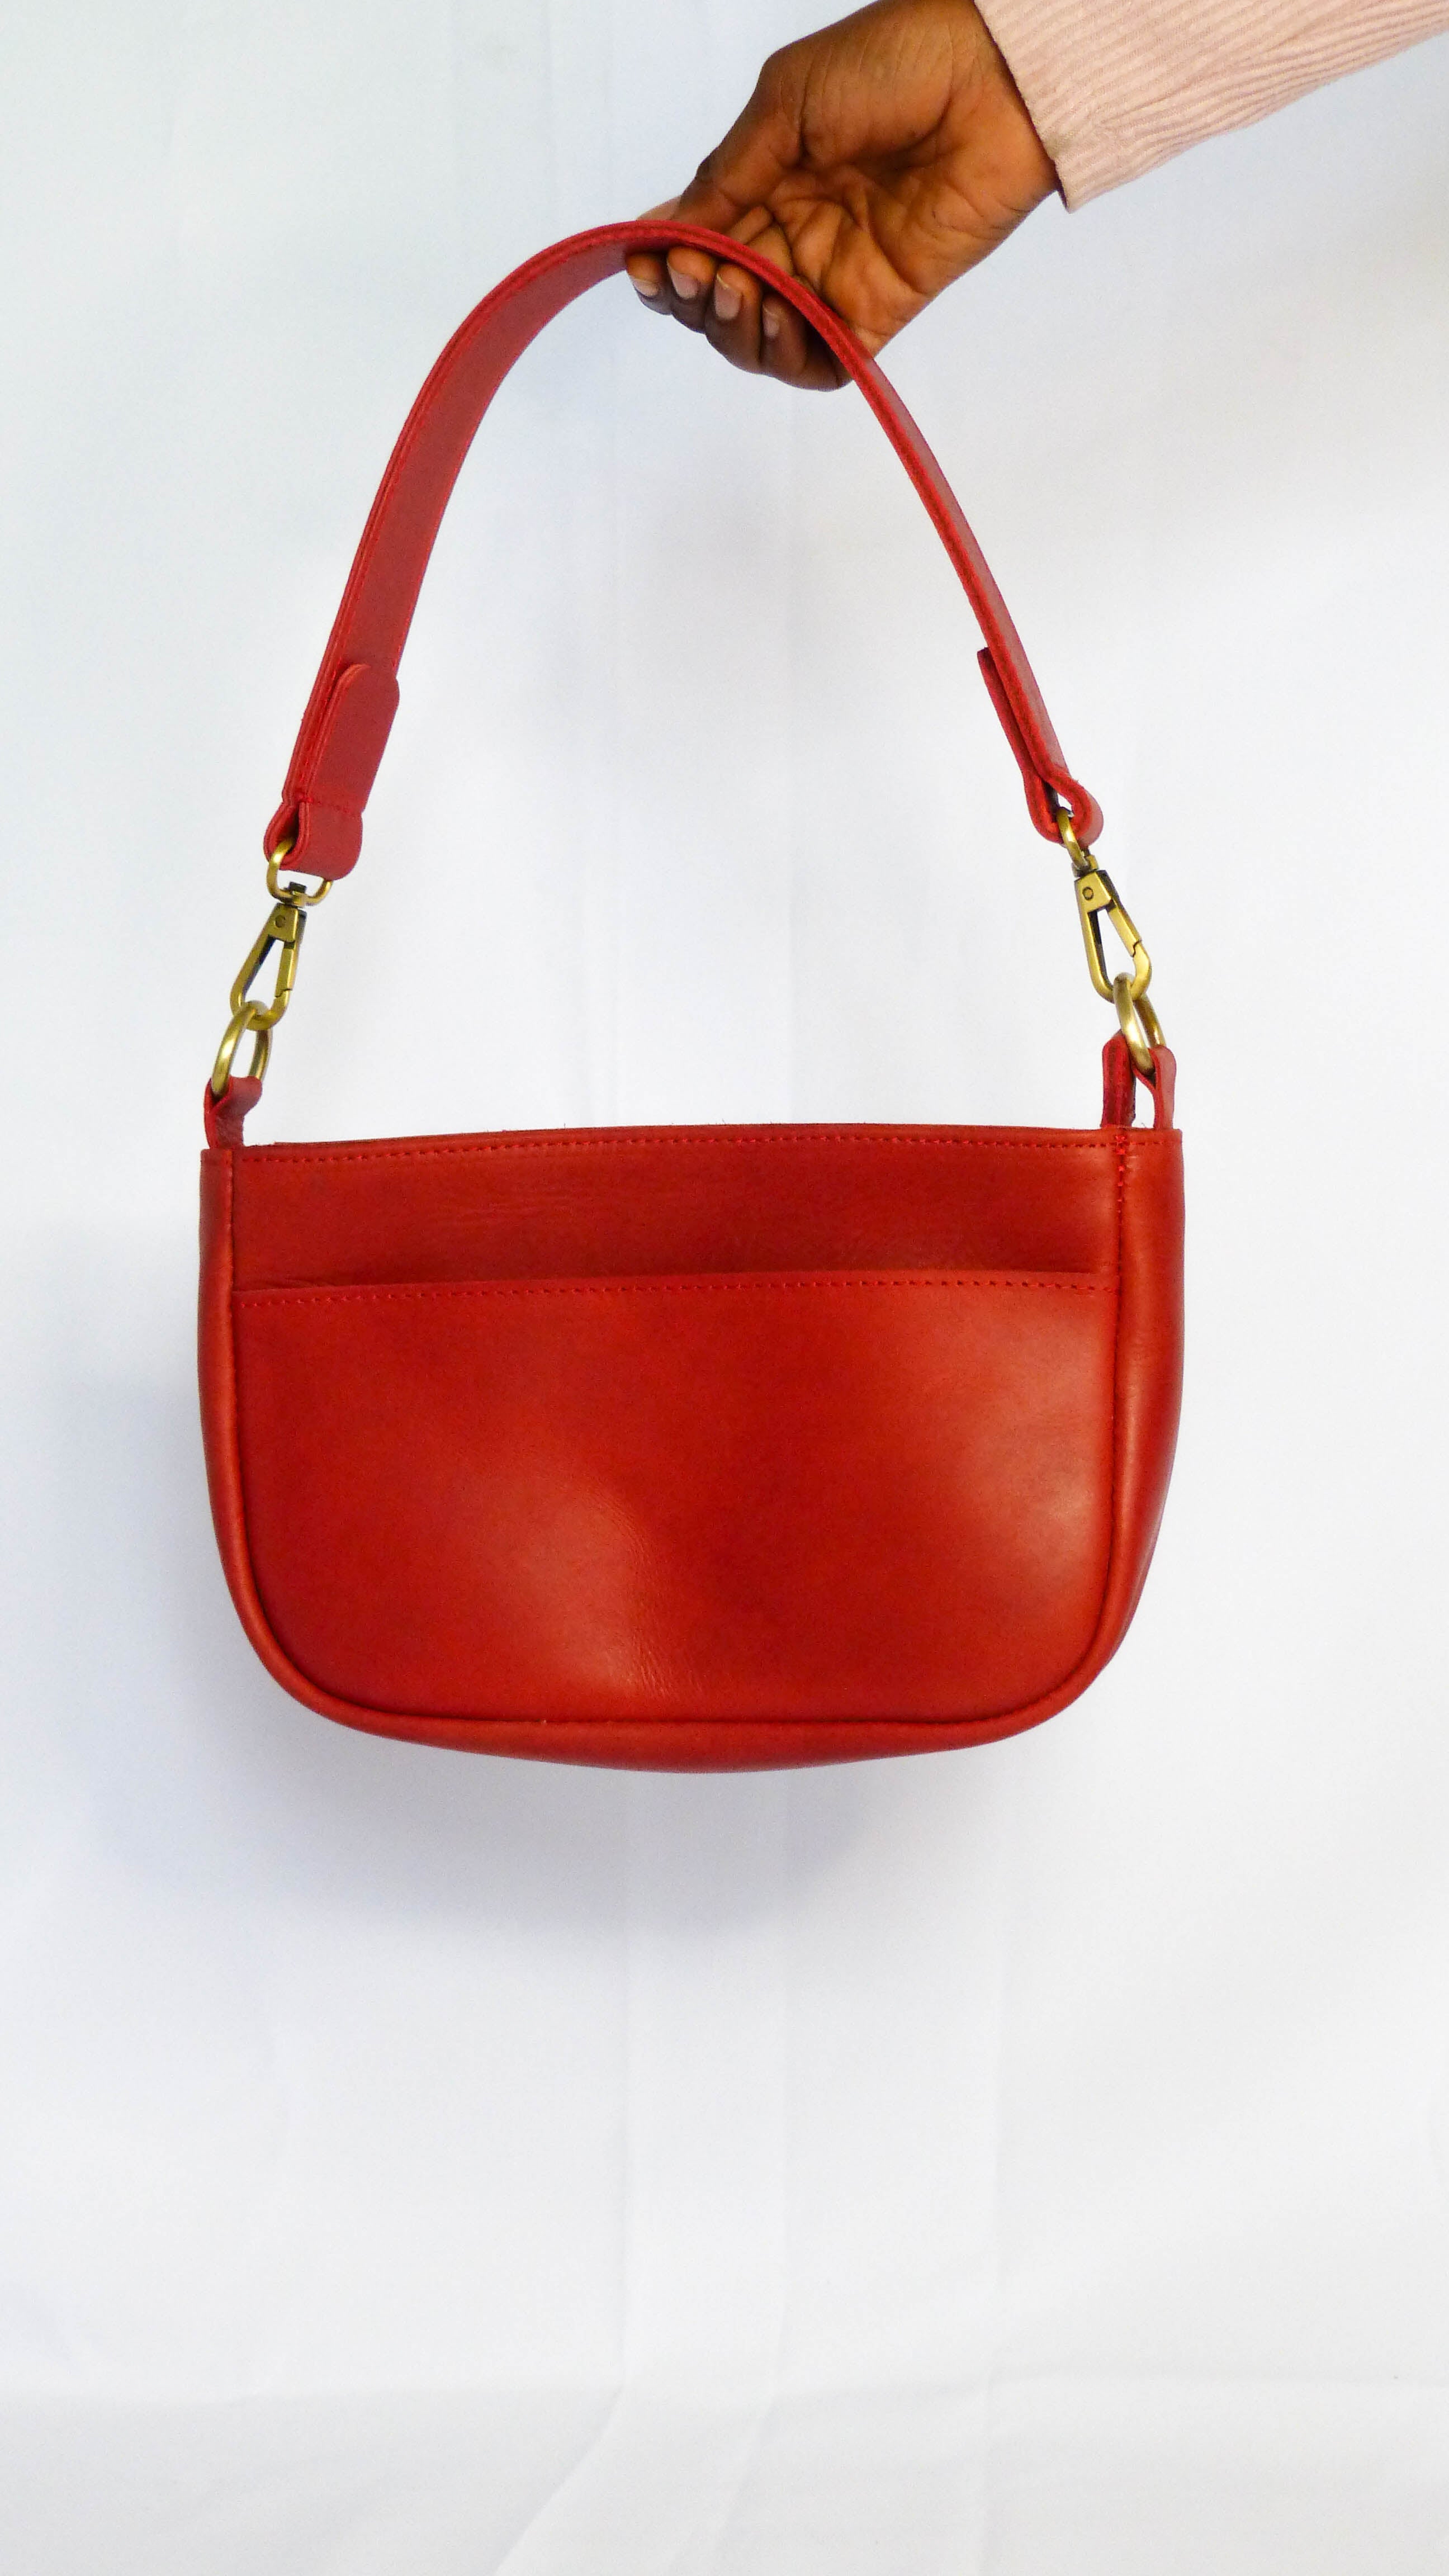 Handcrafted Jessica Leather Purse in Cherry with gold handles and removable shoulder strap. Features zippered top, inside zipper pocket, and outside phone pocket. Ethically made by Ethiopian artisans.